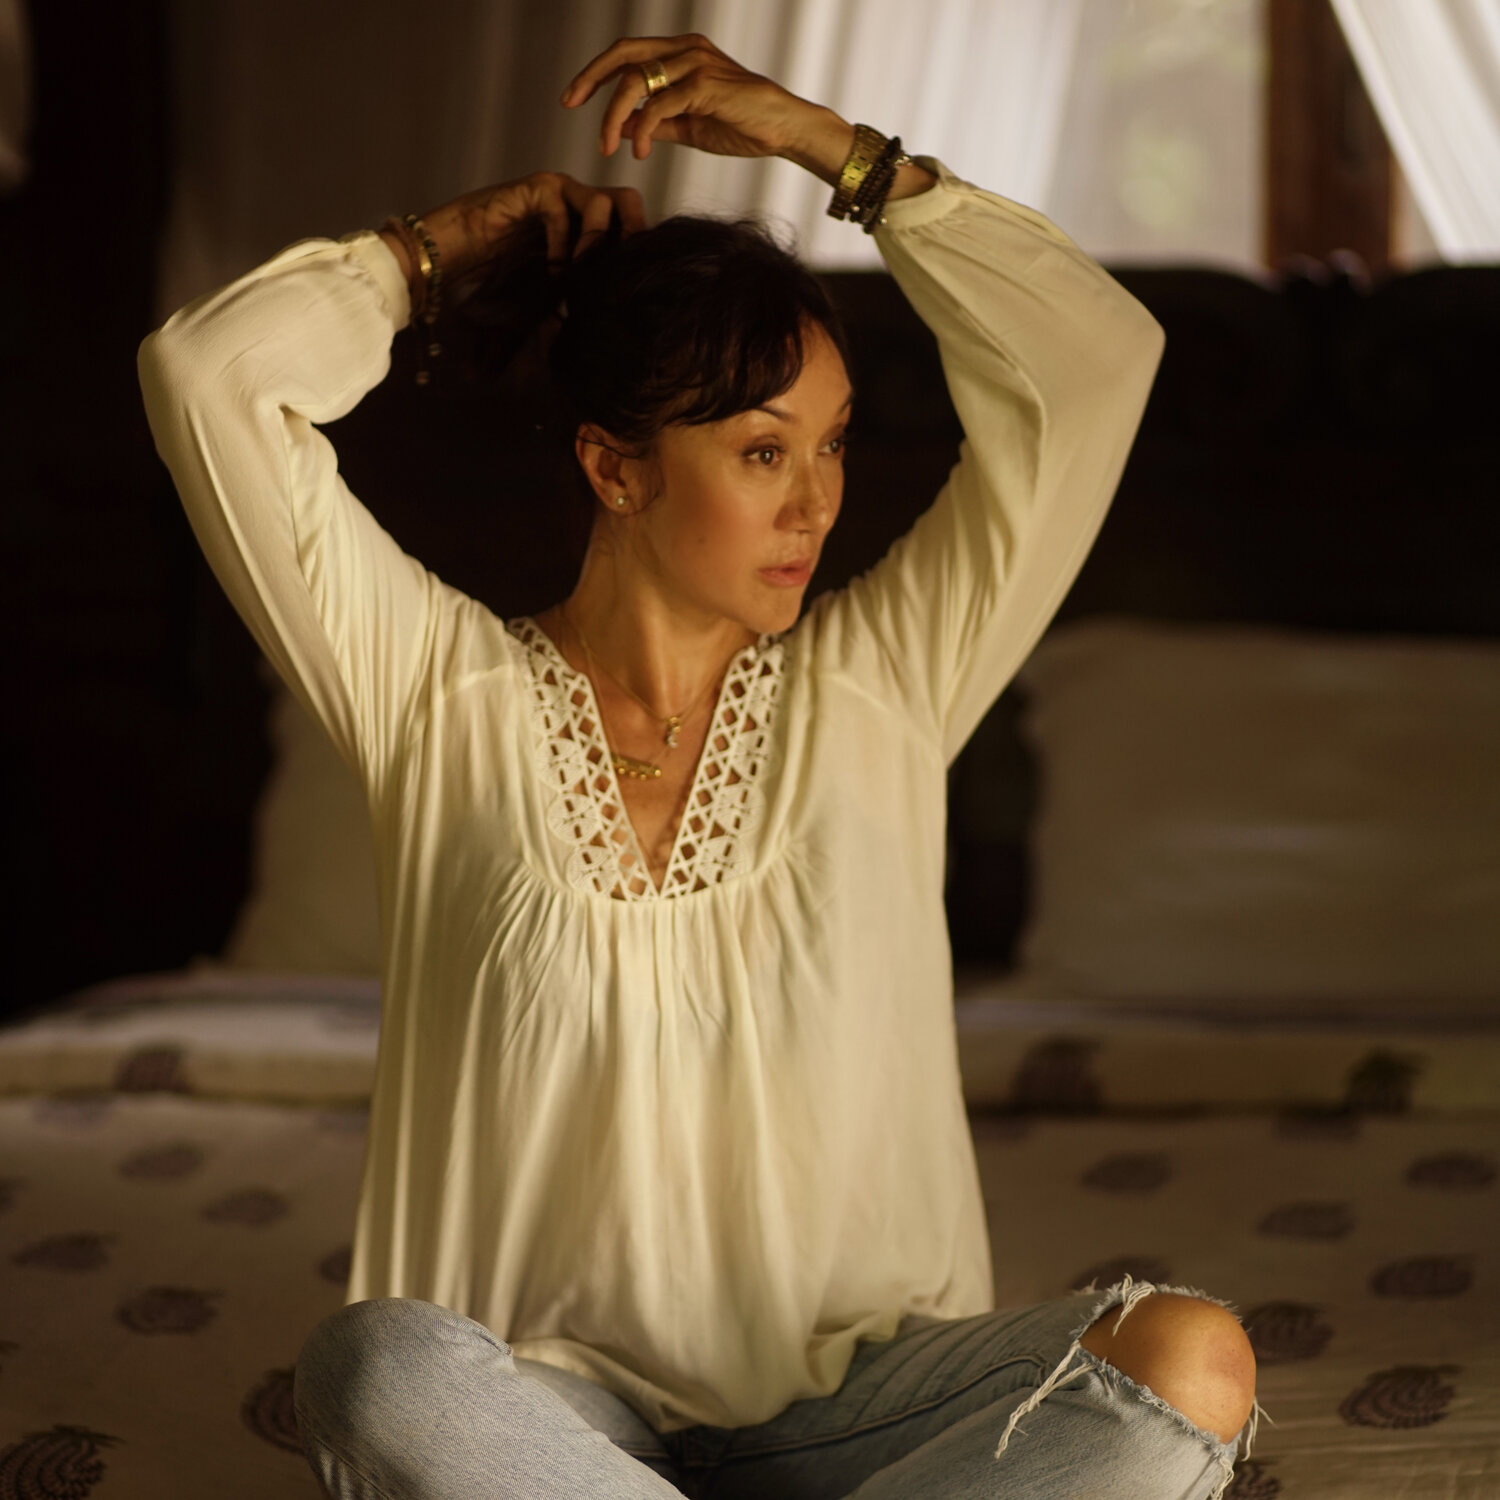 Luiza, the founder of Lulu Yasmine, sits on a daybed wearing light jeans and a delicate white shirt, gracefully putting her hair up. Luiza is a Brazillian-Chinese woman with dark hair.